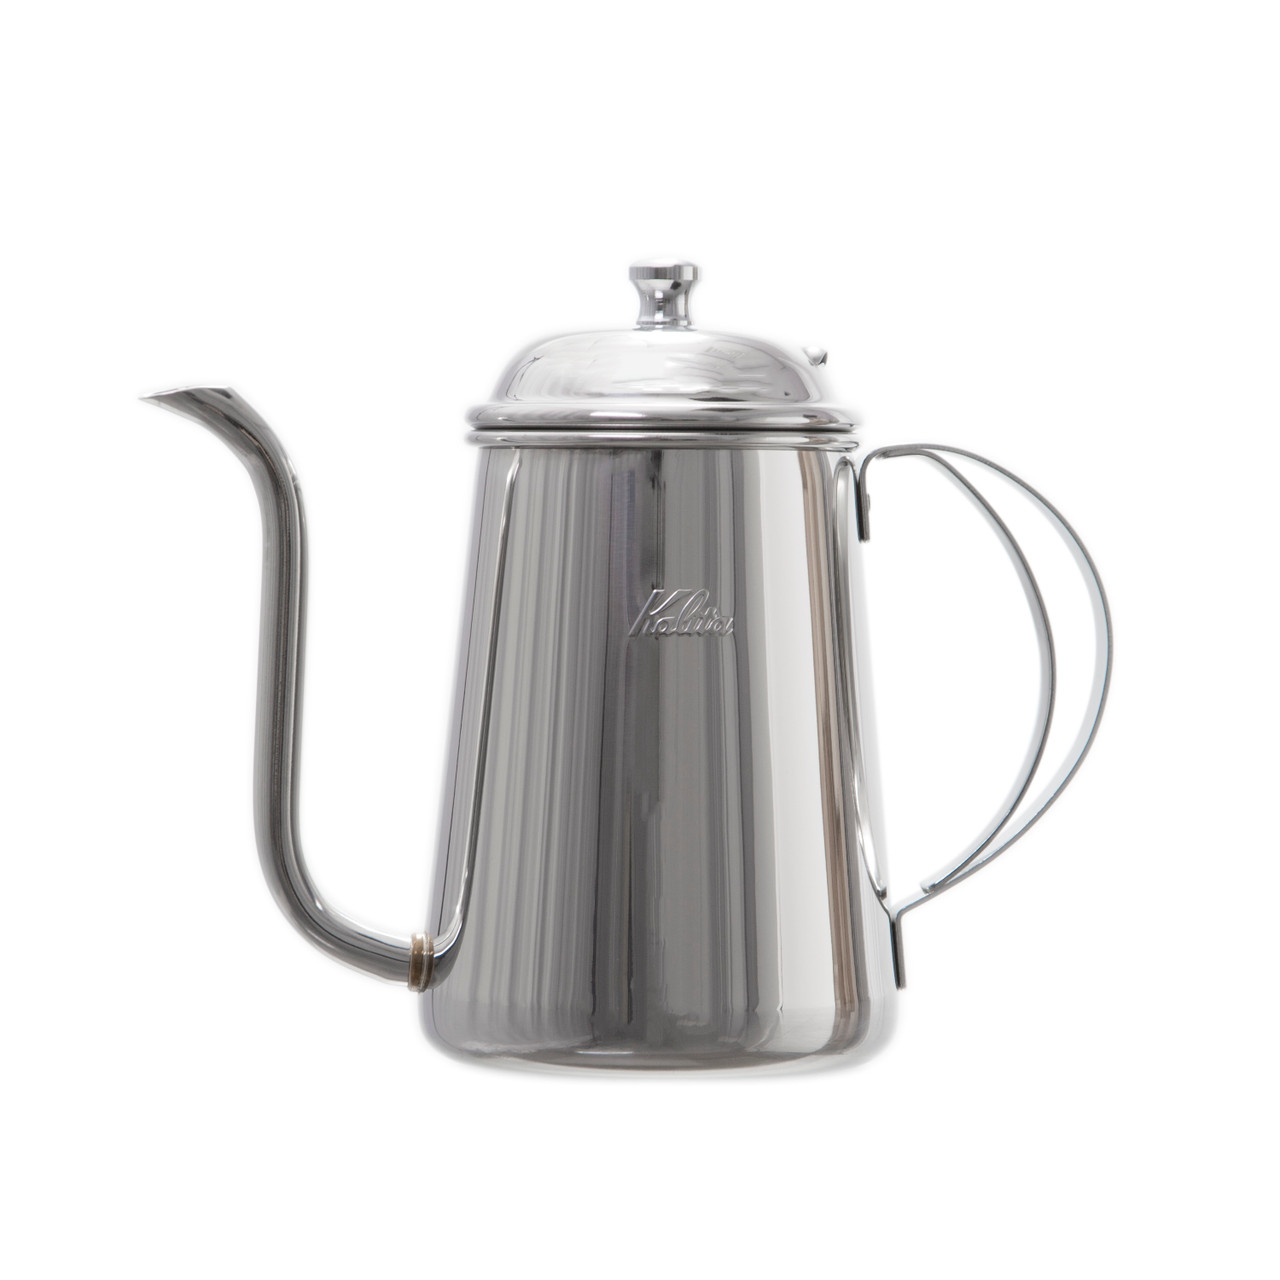 https://cdn11.bigcommerce.com/s-6h7ychjk4/images/stencil/1280x1280/products/7747/87654/kalita-thin-spout-kettle-side1__04538.1597177308.jpg?c=1